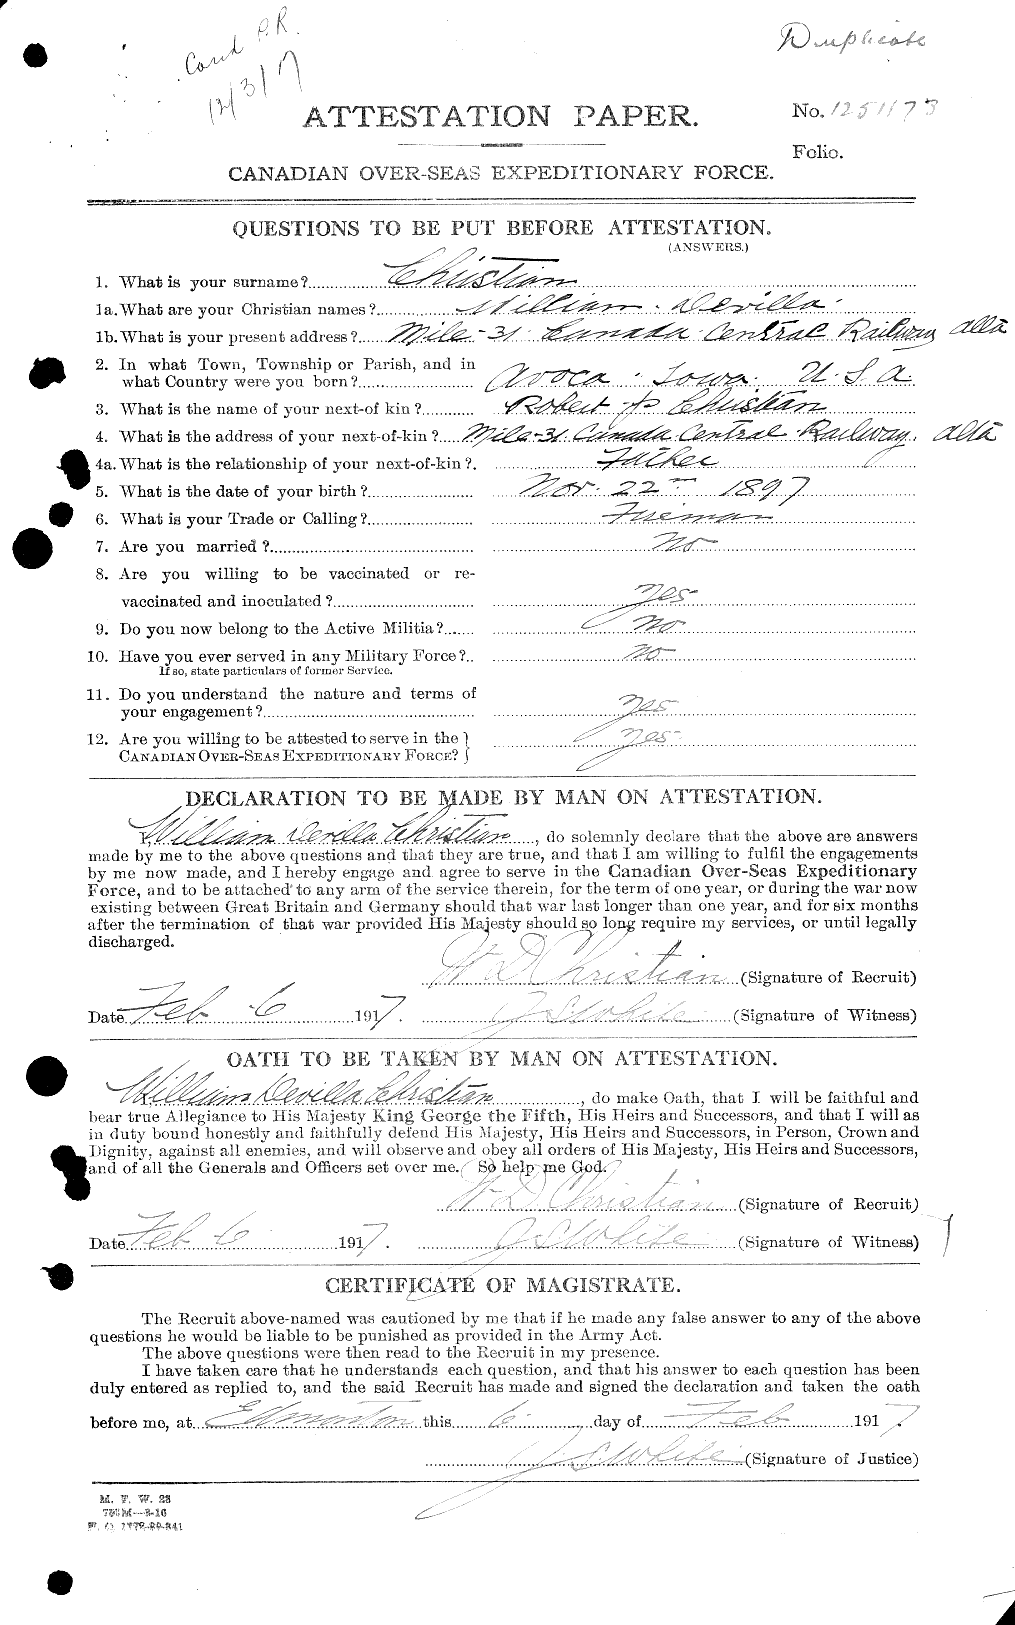 Personnel Records of the First World War - CEF 021709a